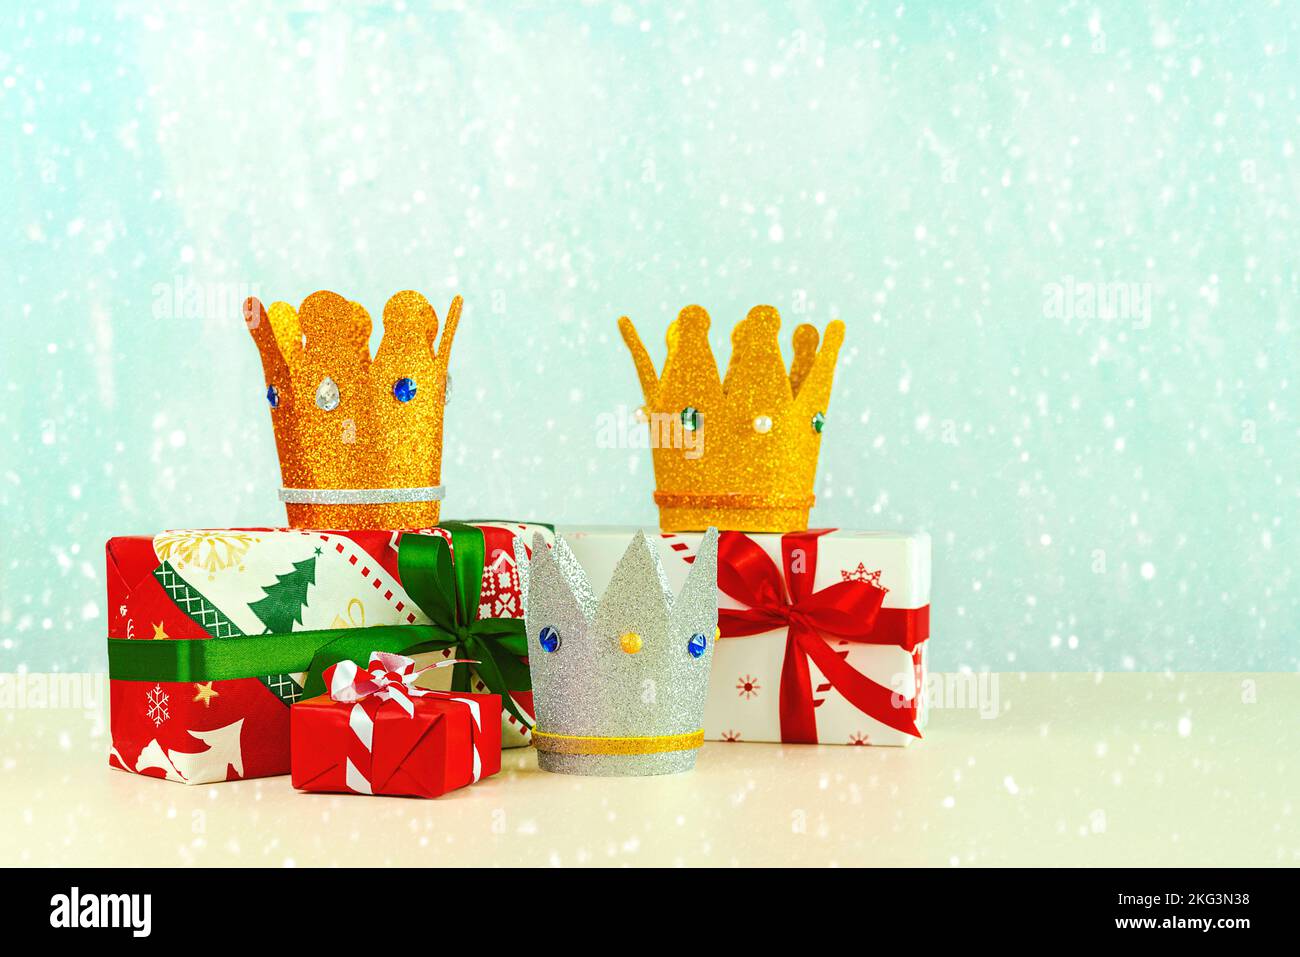 Three crowns of the three wise men with christmas gift boxes over blue background. Concept for Reyes Magos day. Three Wise Men Stock Photo